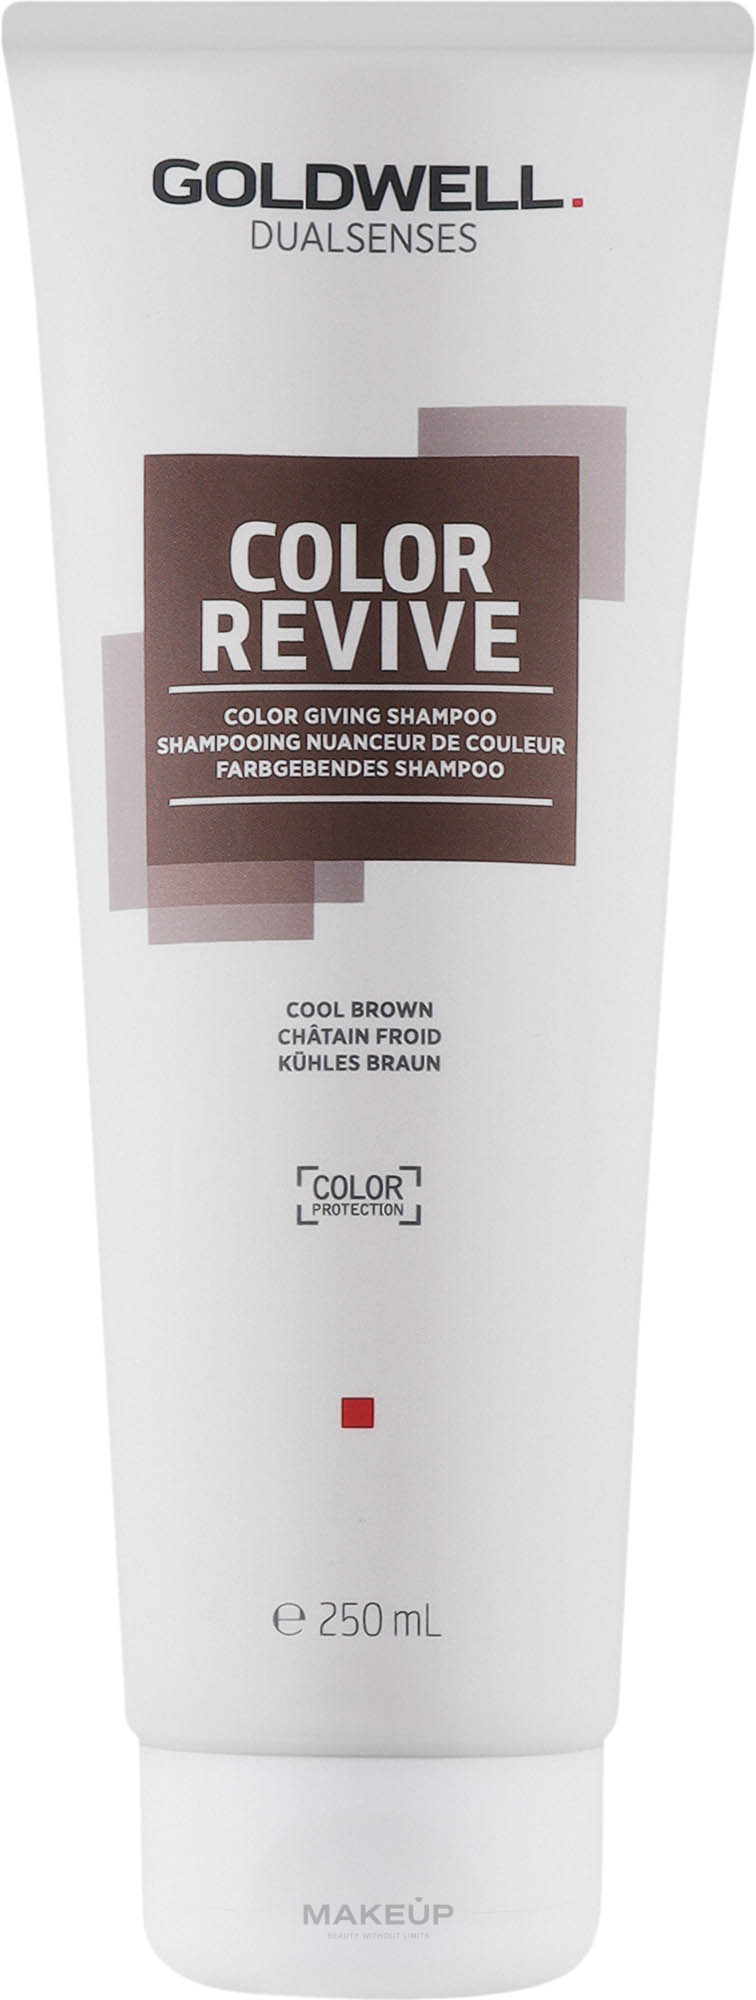 Tonisierendes Haarshampoo - Goldwell Dualsenses Color Revive Color Giving Shampoo — Bild Cool Brown